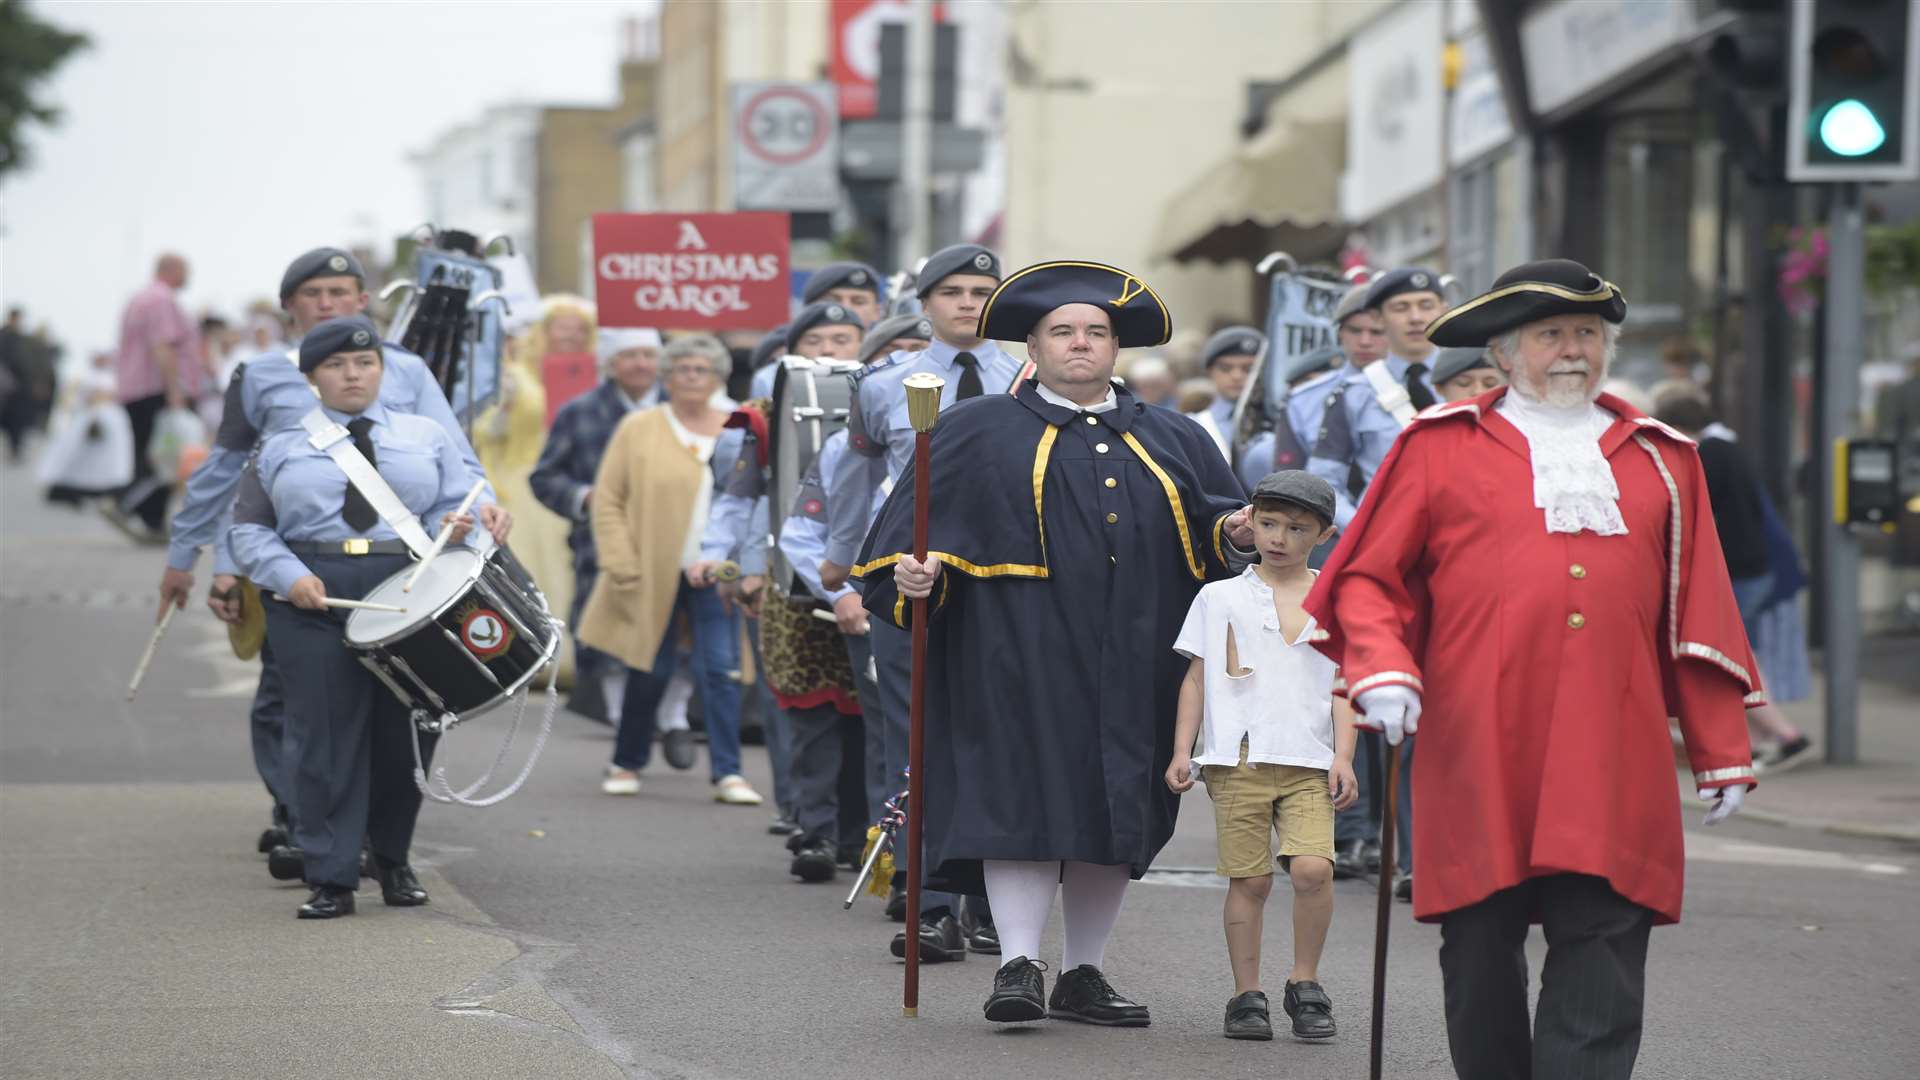 Victorian Broadstairs merged with the 21st century, 2016